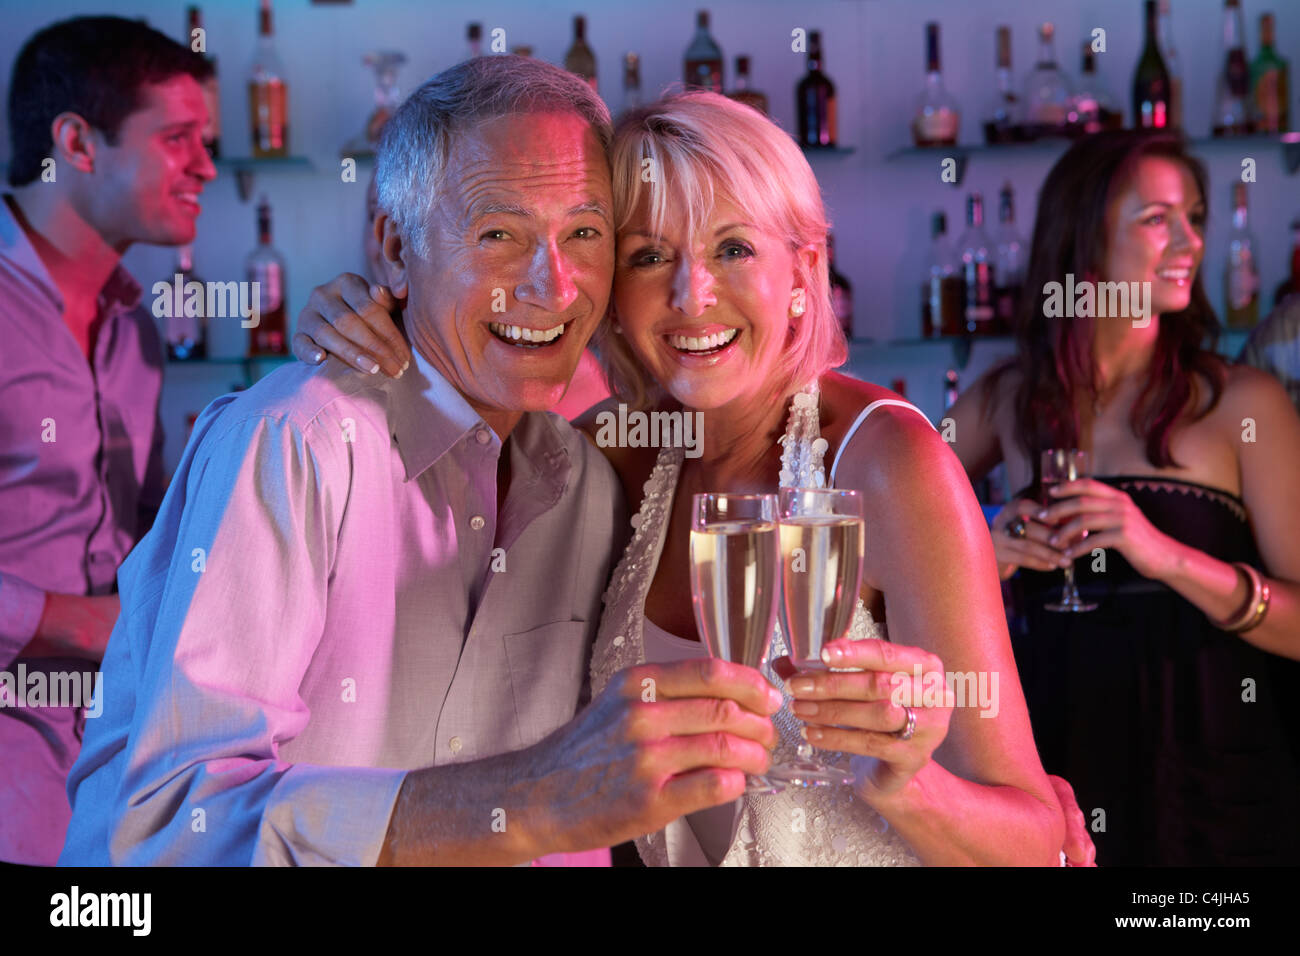 Senior Couple Having Fun In Busy Bar Banque D'Images